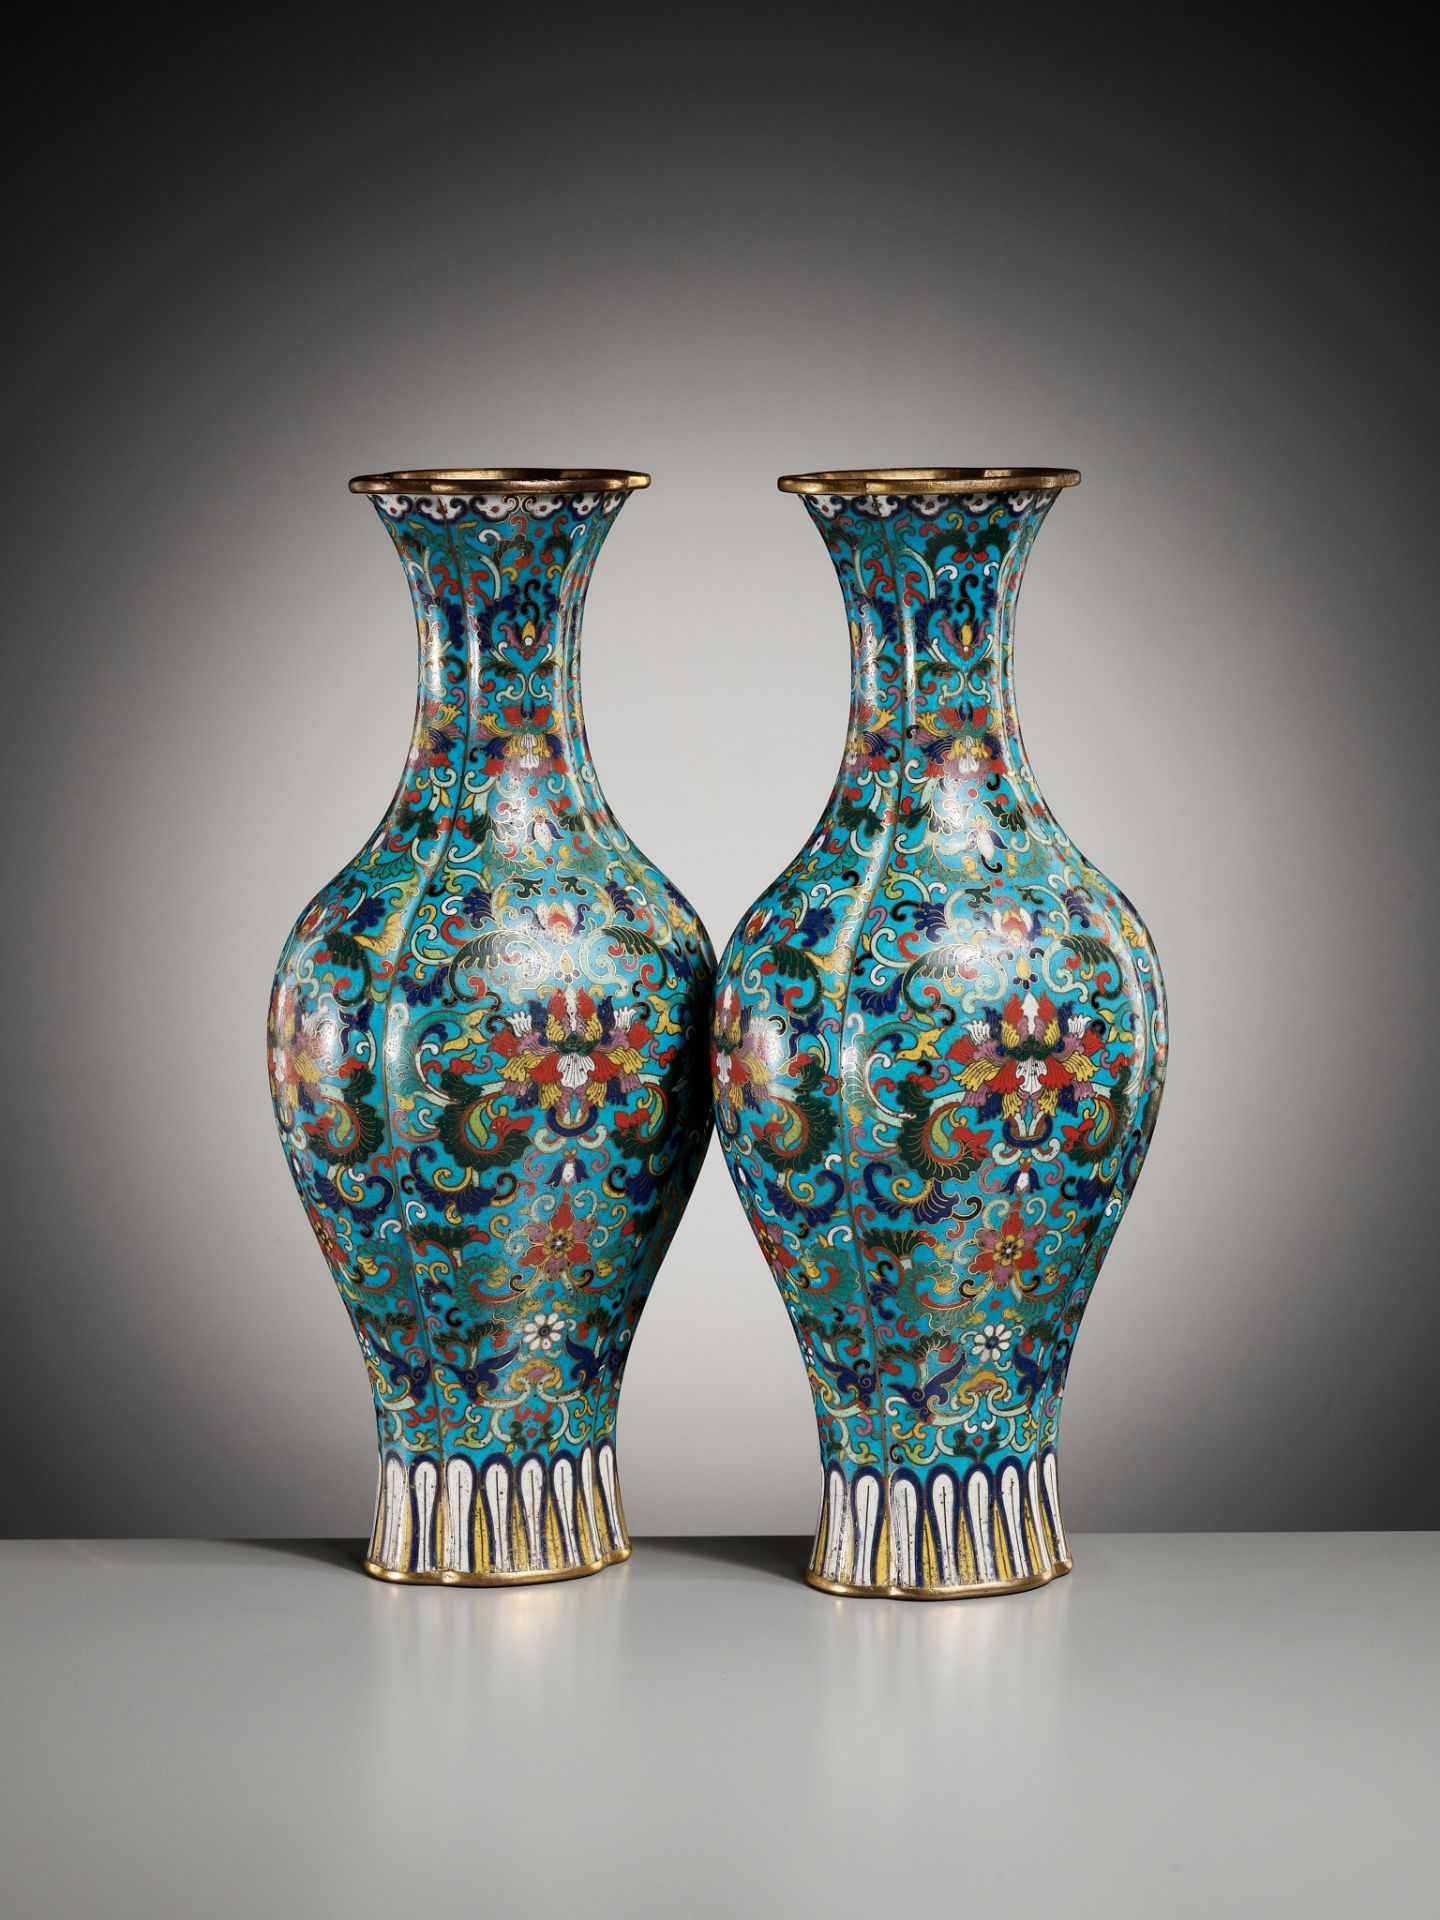 AN IMPERIAL PAIR OF QUADRILOBED CLOISONNÉ ENAMEL ‘LOTUS’ VASES, QIANLONG MARK AND OF THE PERIOD - Image 8 of 17